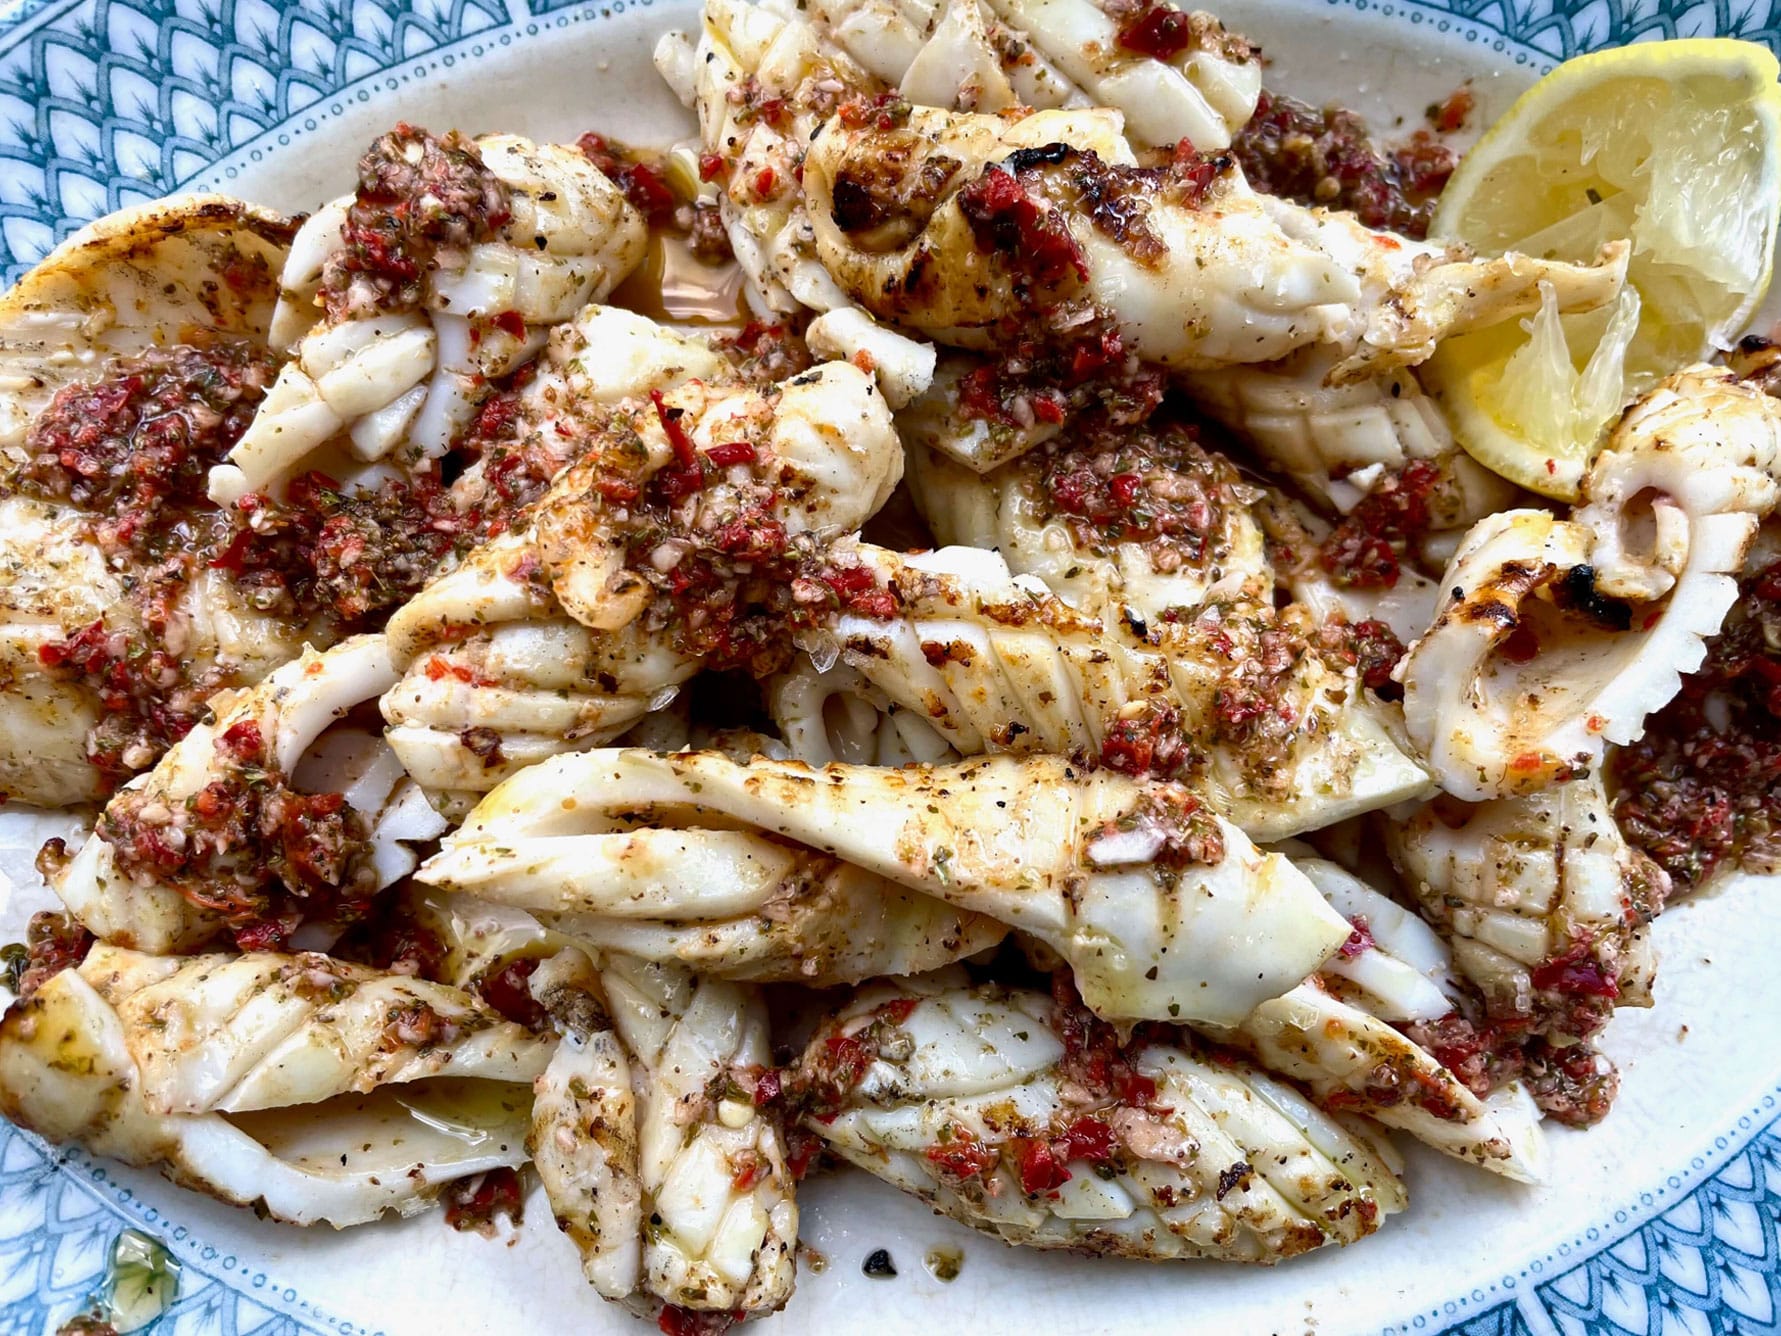 Grilled Squid with Chilli, Garlic and Oregano Sauce